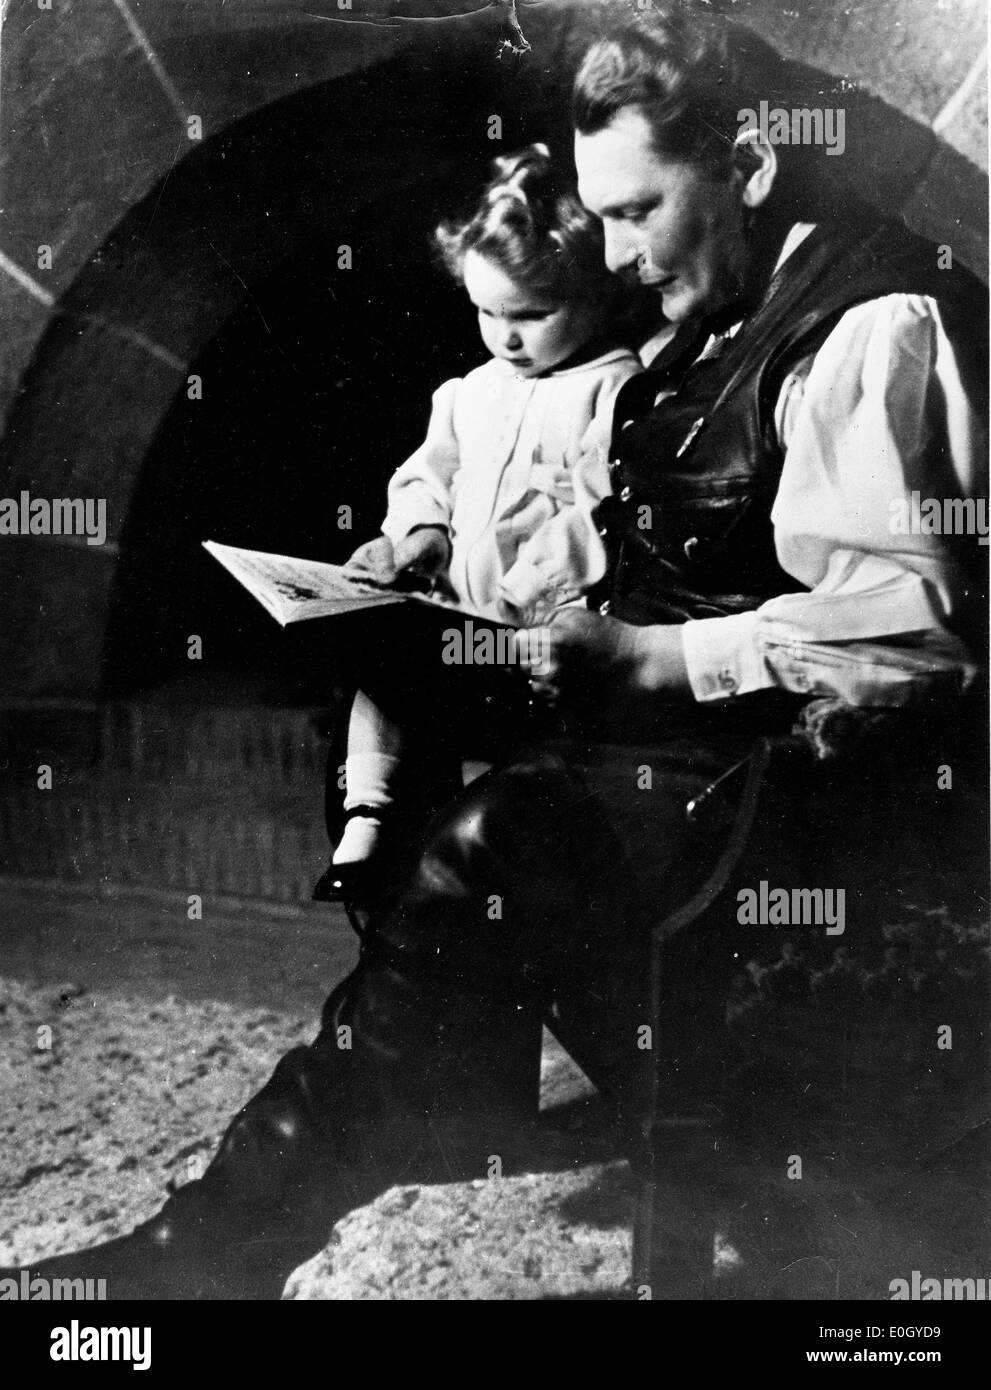 Jan. 01, 1940 - Germany - File Photo: circa 1930s-1940s, exact location unknown. Nazi leader HERMANN GOERING with his daughter EDDA in one of the photographs from the personal collection of the Hitler's right-hand man who committed suicide in his Nuremberg cell in 1945. Stock Photo